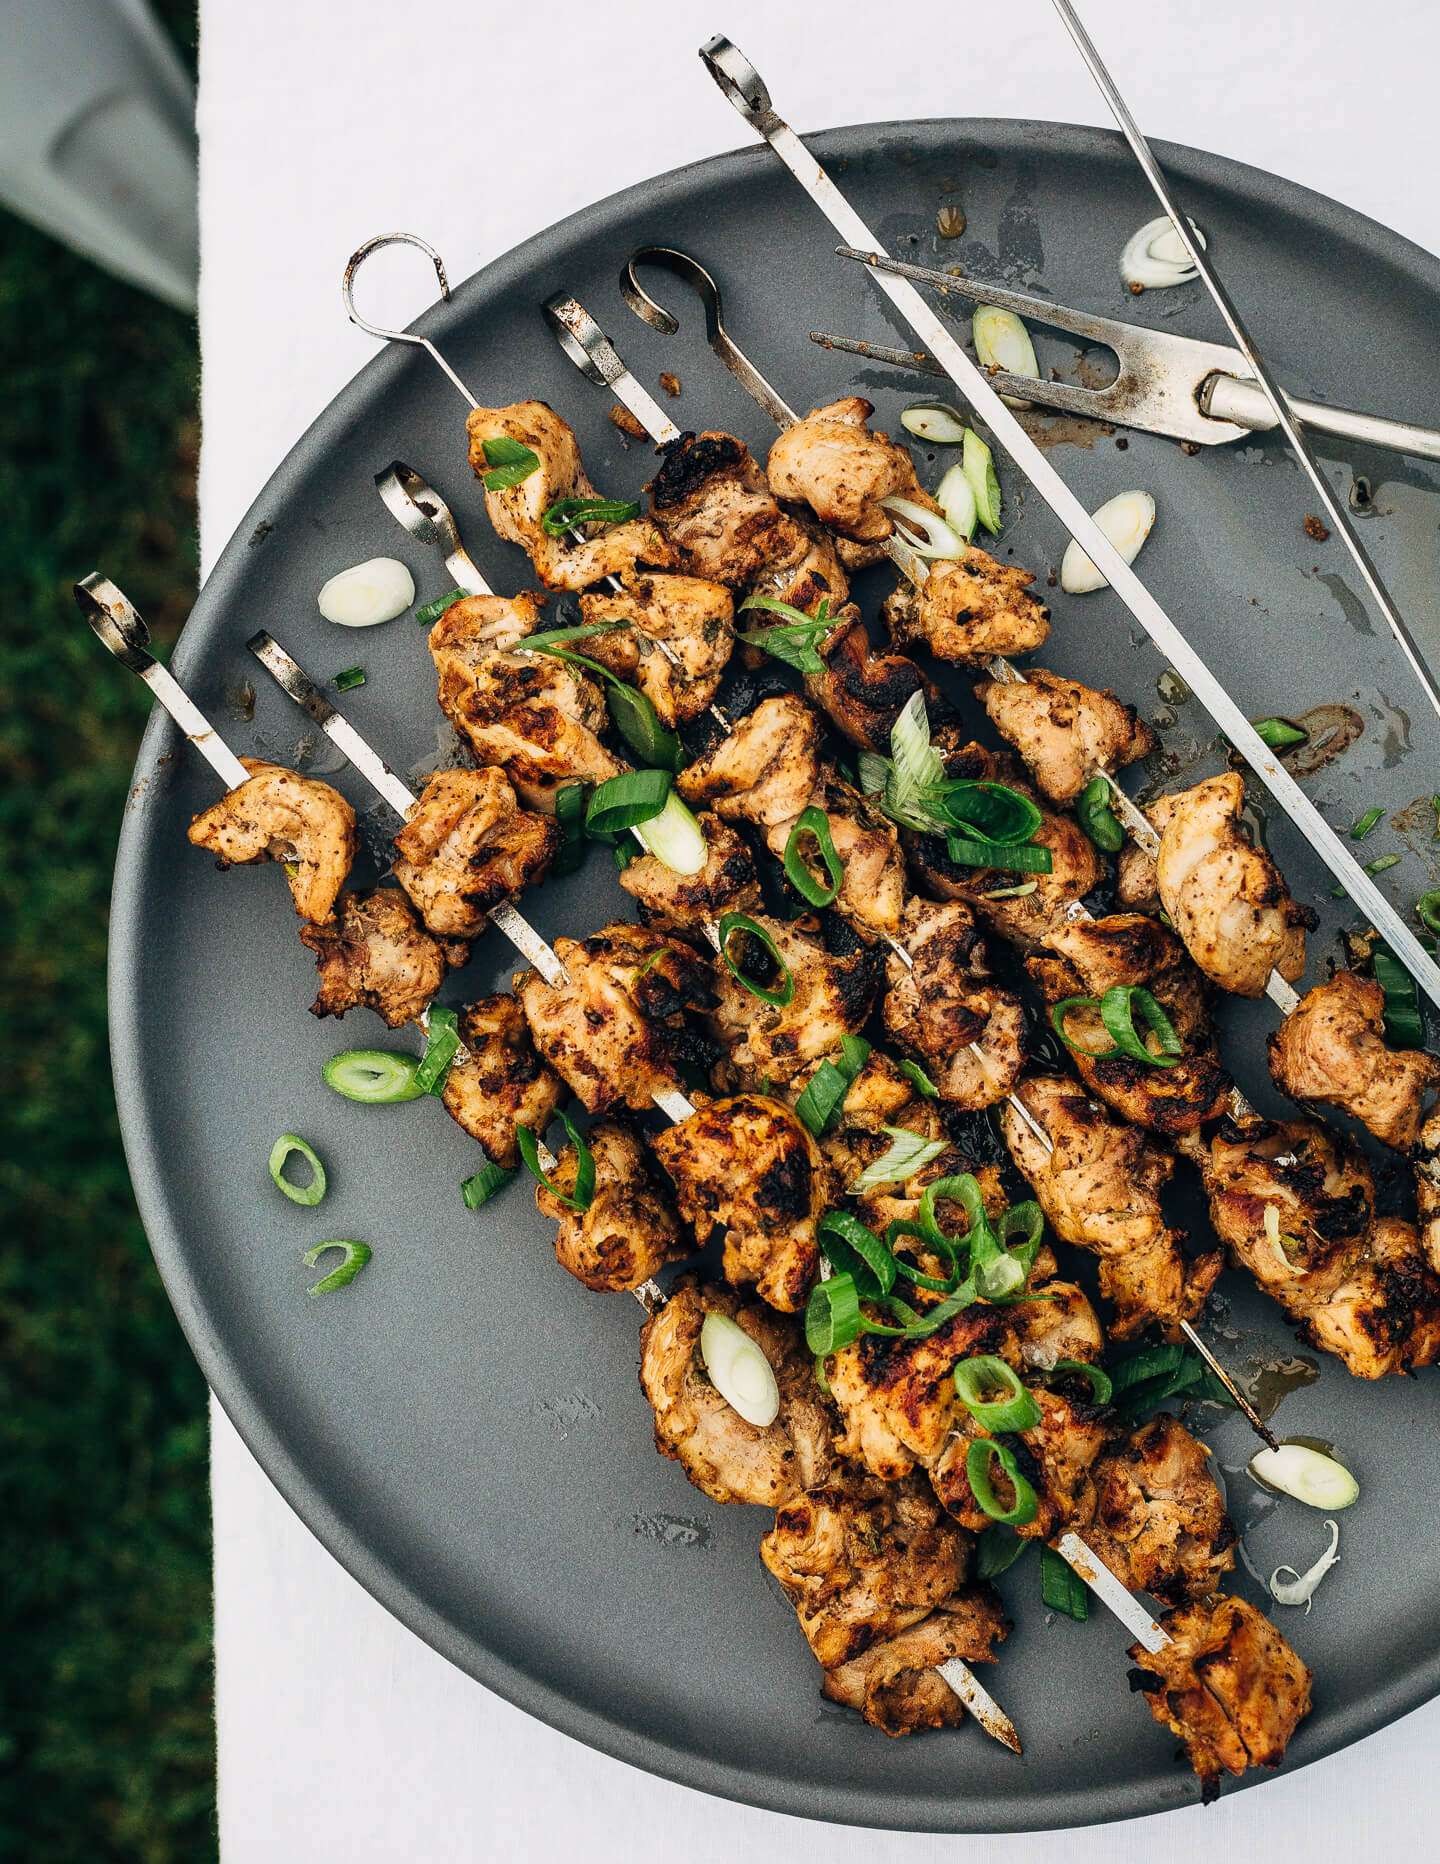 Deliciously tender lemon- and yogurt-marinated grilled chicken kebobs make for a vibrant summer cookout. The grilled chicken skewers are served alongside grilled flatbreads, tzatziki, and an herbed salad made with grilled zucchini, tomato, and red onion.